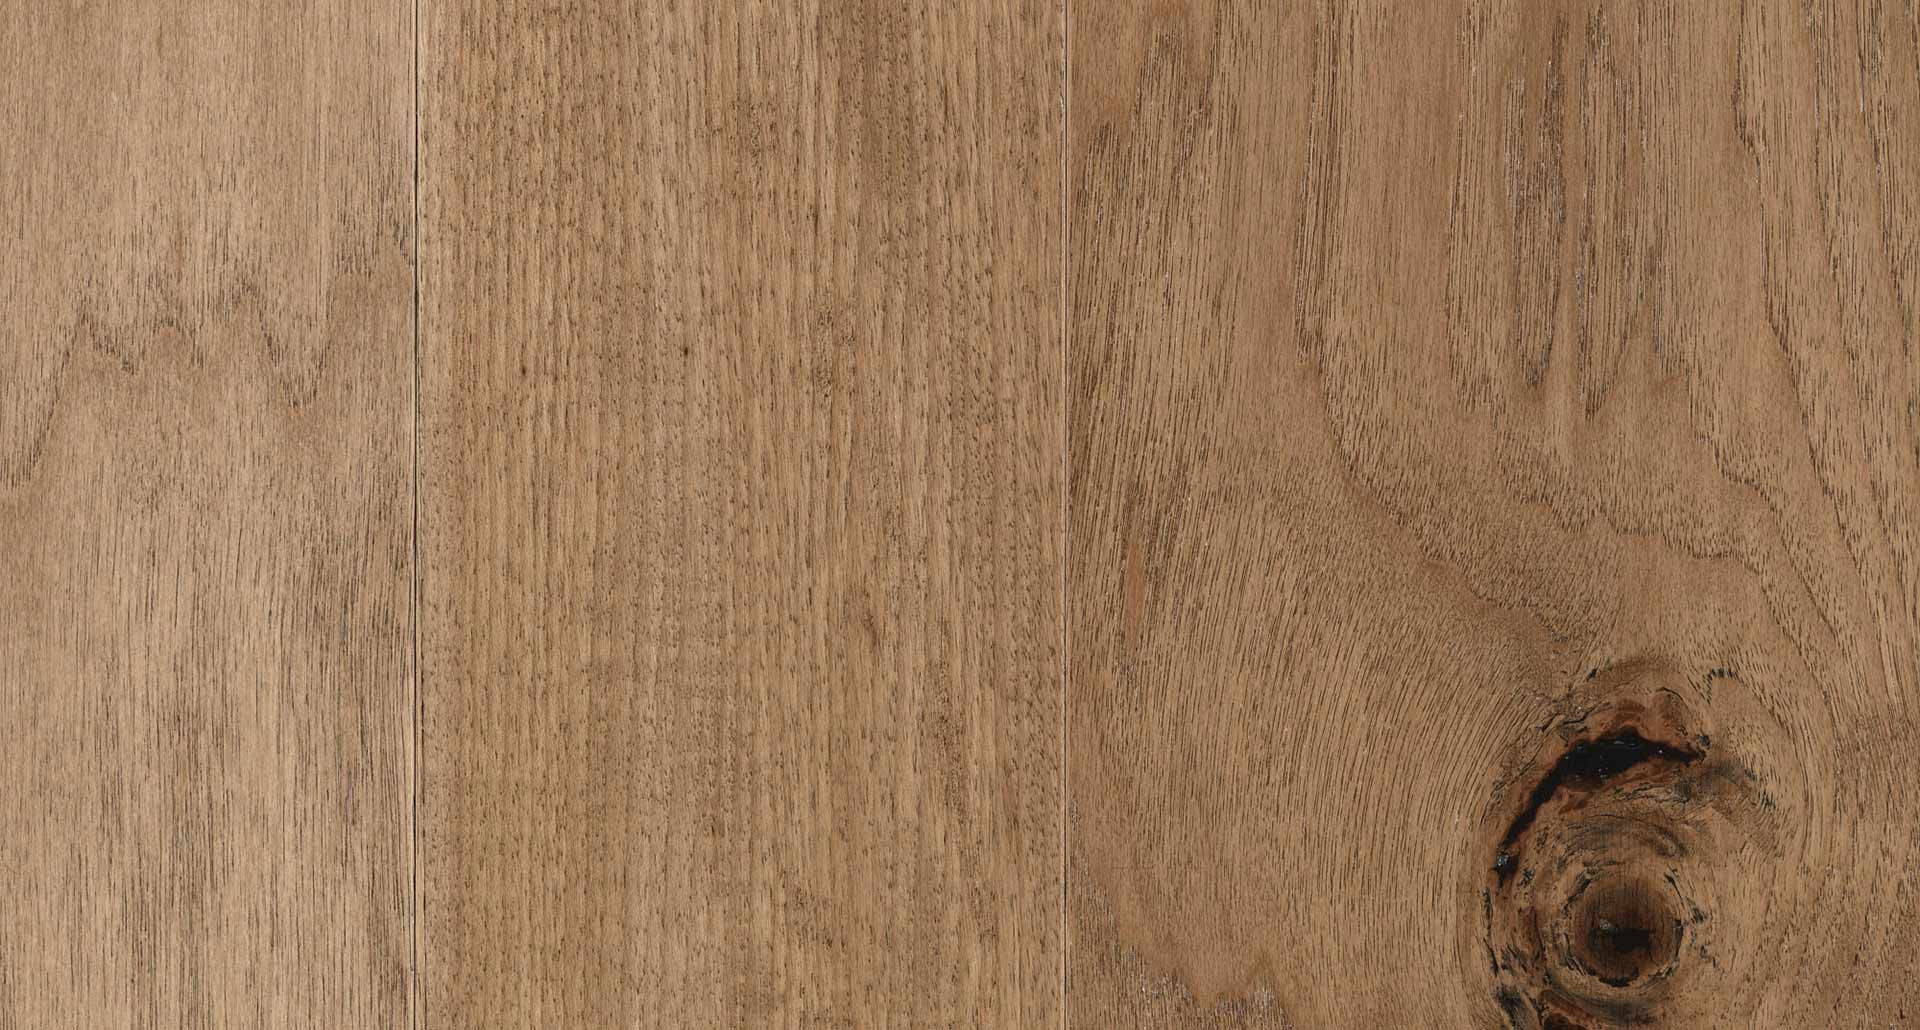 24 Recommended Hickory Engineered Hardwood Flooring Reviews 2024 free download hickory engineered hardwood flooring reviews of engineered hickory wood floors inspirational wood floor stain in engineered hickory wood floors lovely falls river hickory wire brushed engine